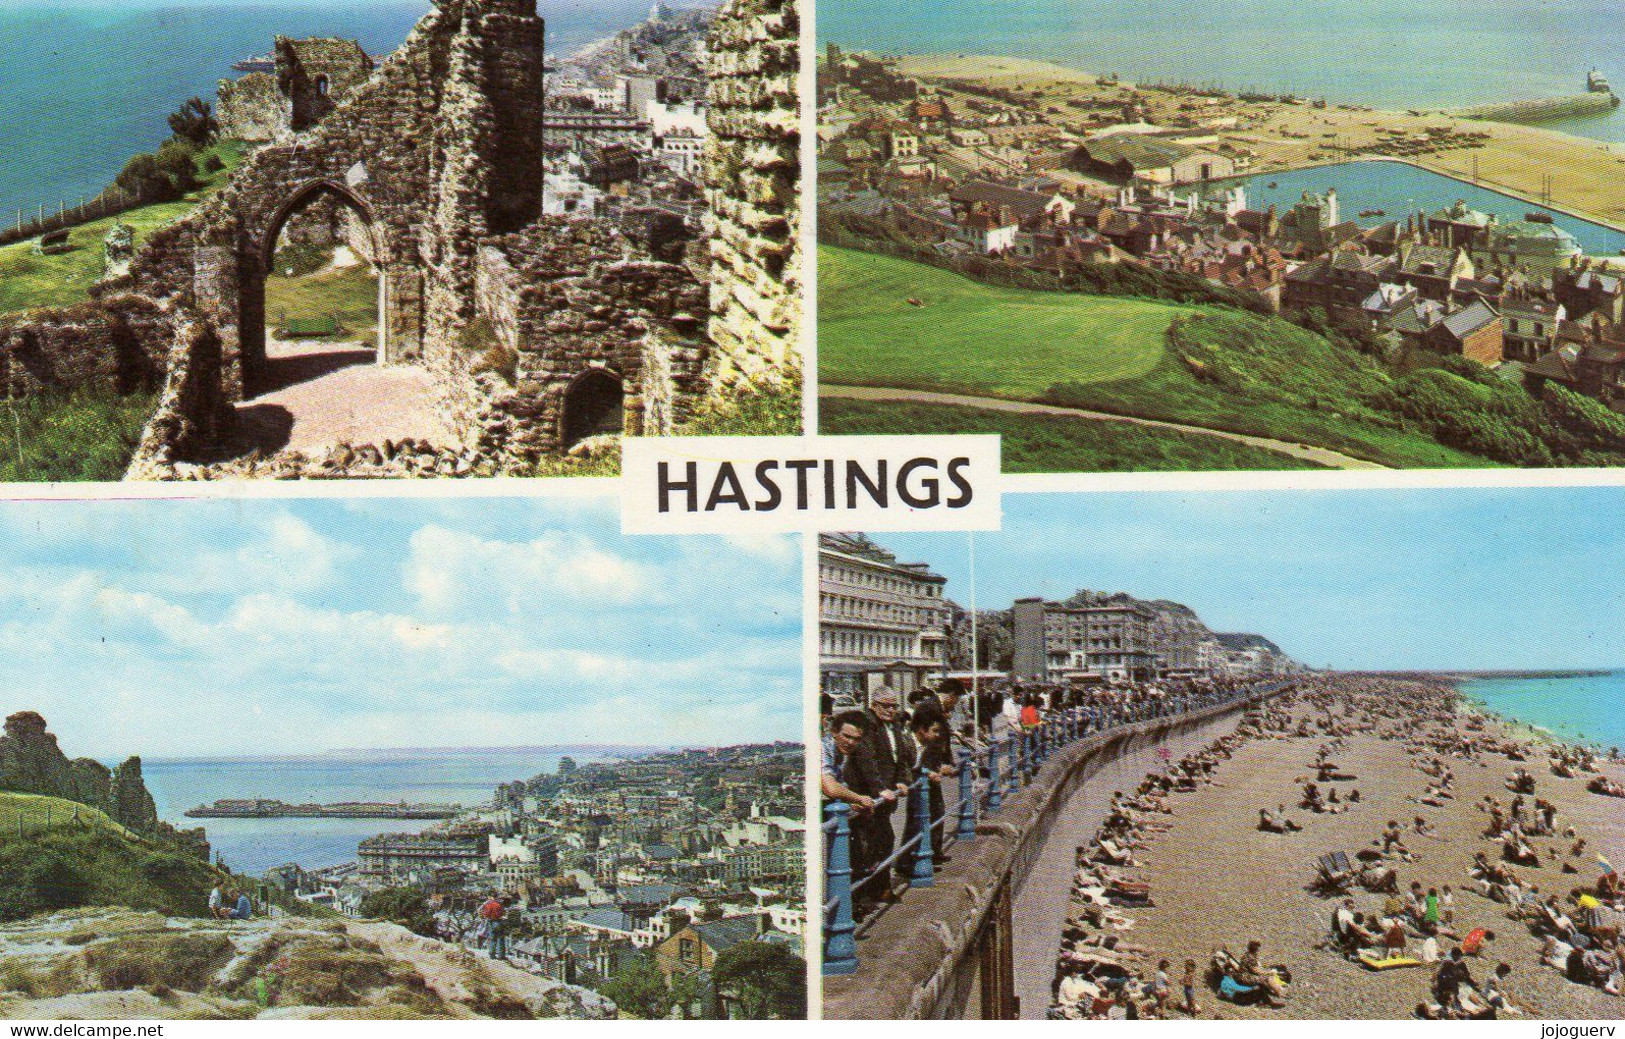 Hasting The Castel Old Town And Finisch Fleet The Beach From The Castel ; Exp De Brighton En 1972 - Hastings